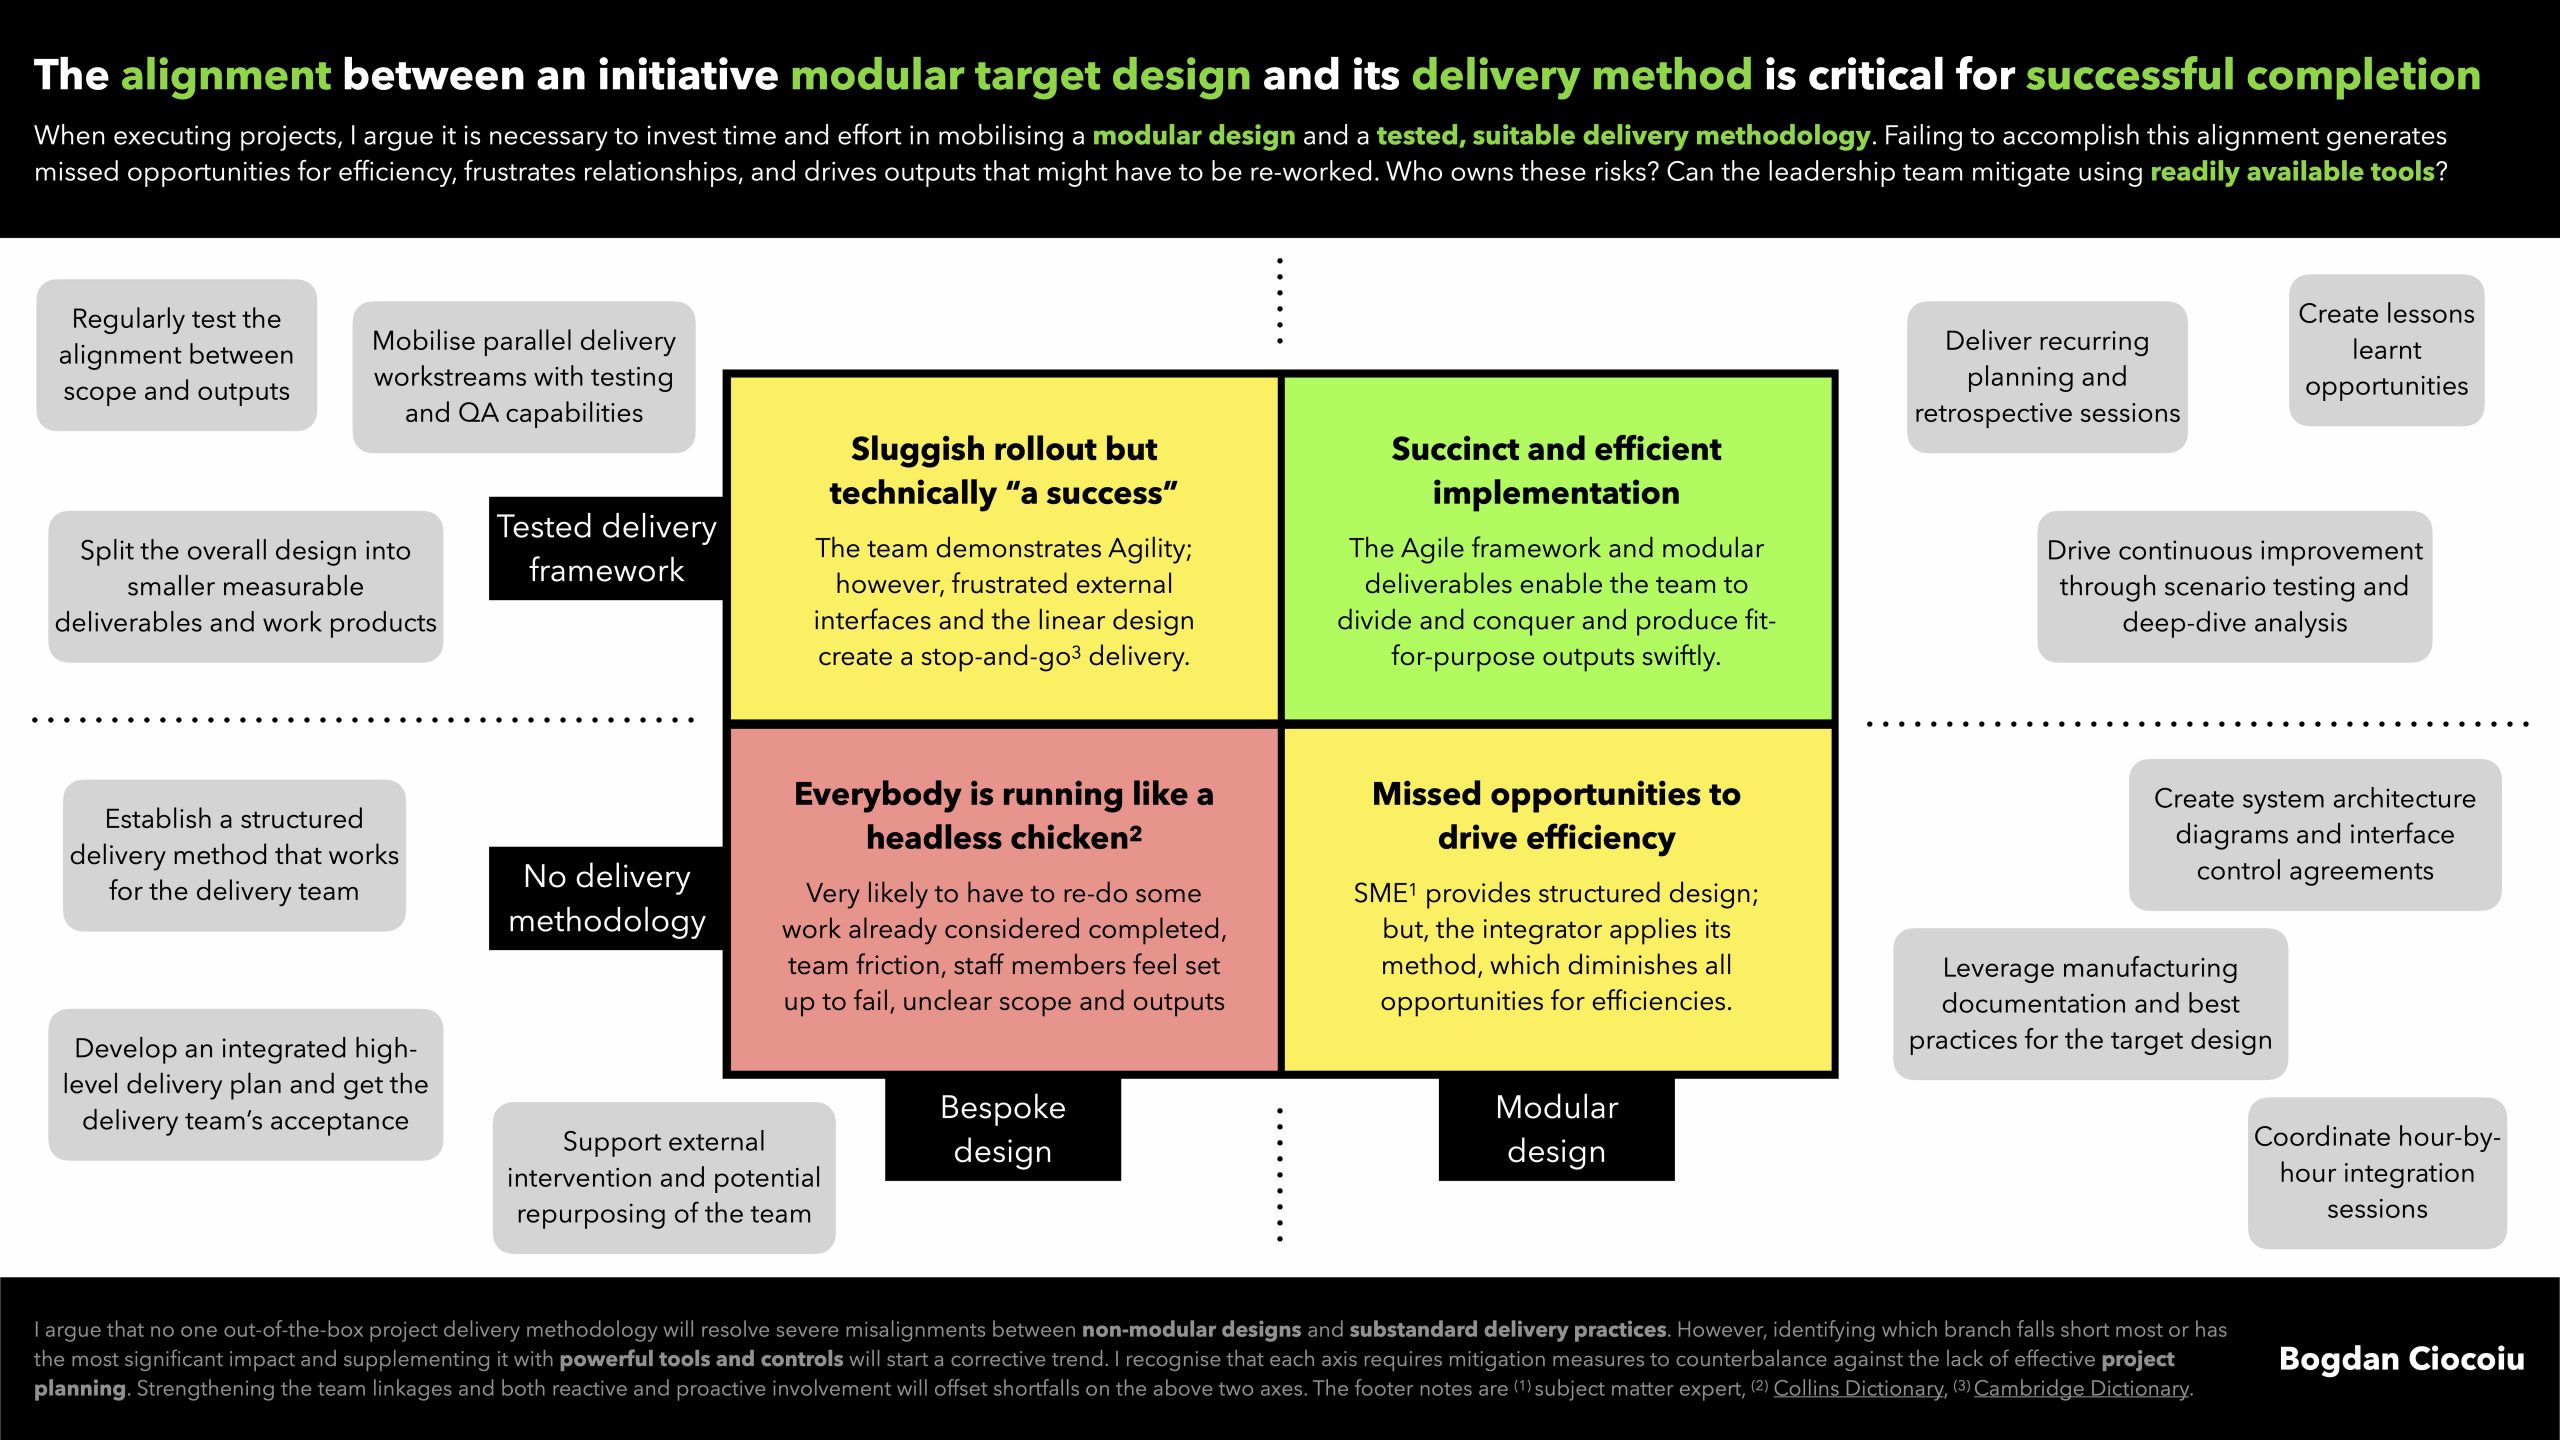 The alignment between an initiative modular target design and its delivery method is critical for the successful completion - Bogdan Ciocoiu